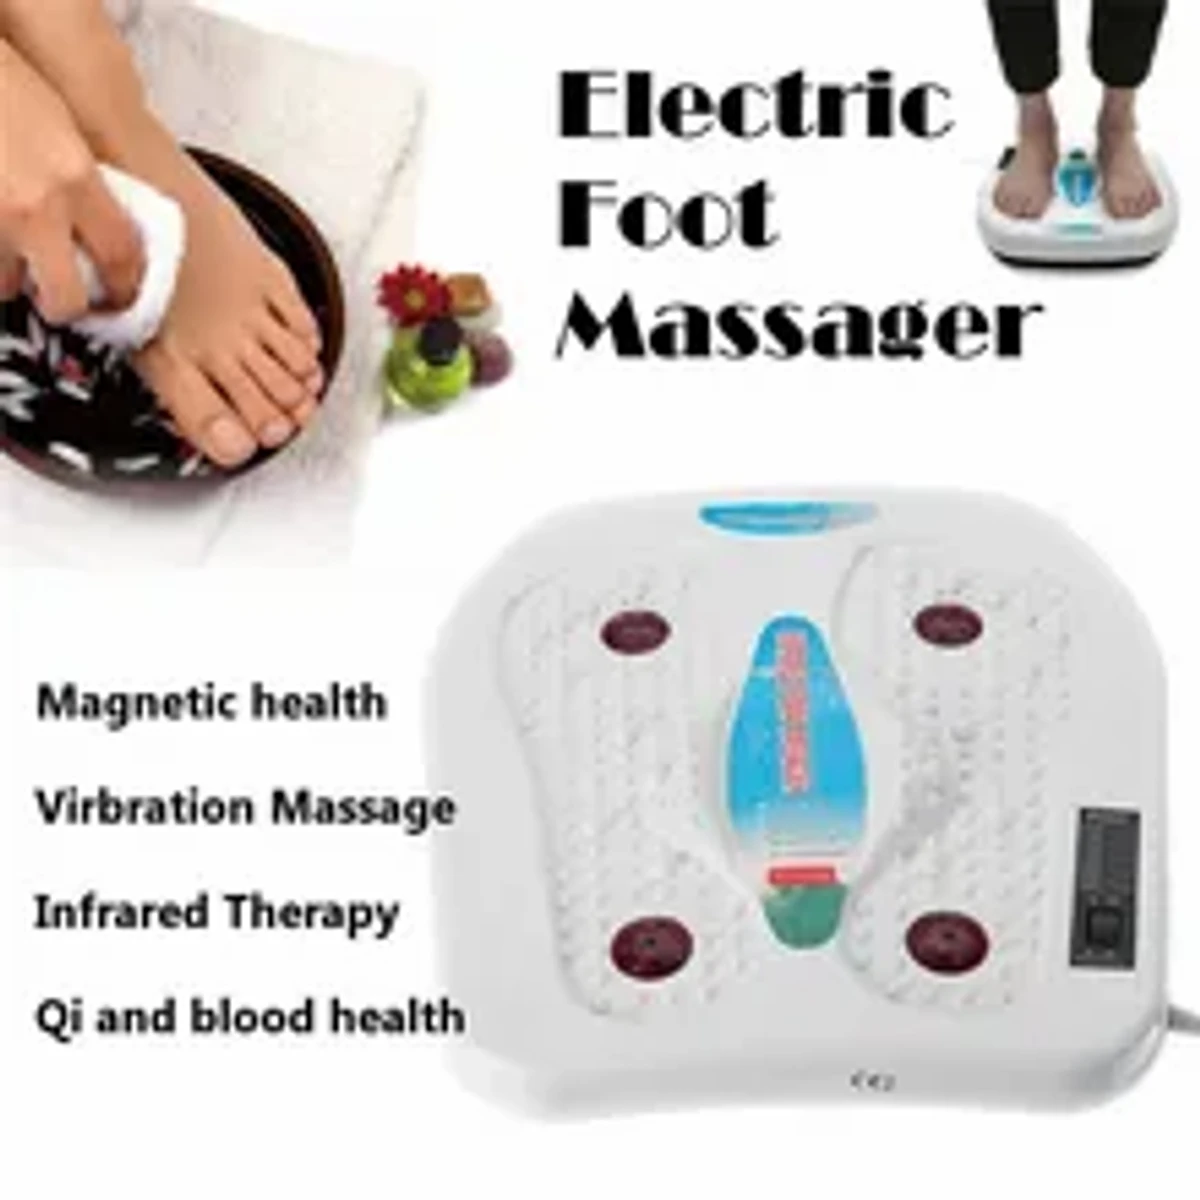 Electric Foot Massager Machine Vibration Massage Infrared Heating Therapy Leg Spa Relieve Fatigue